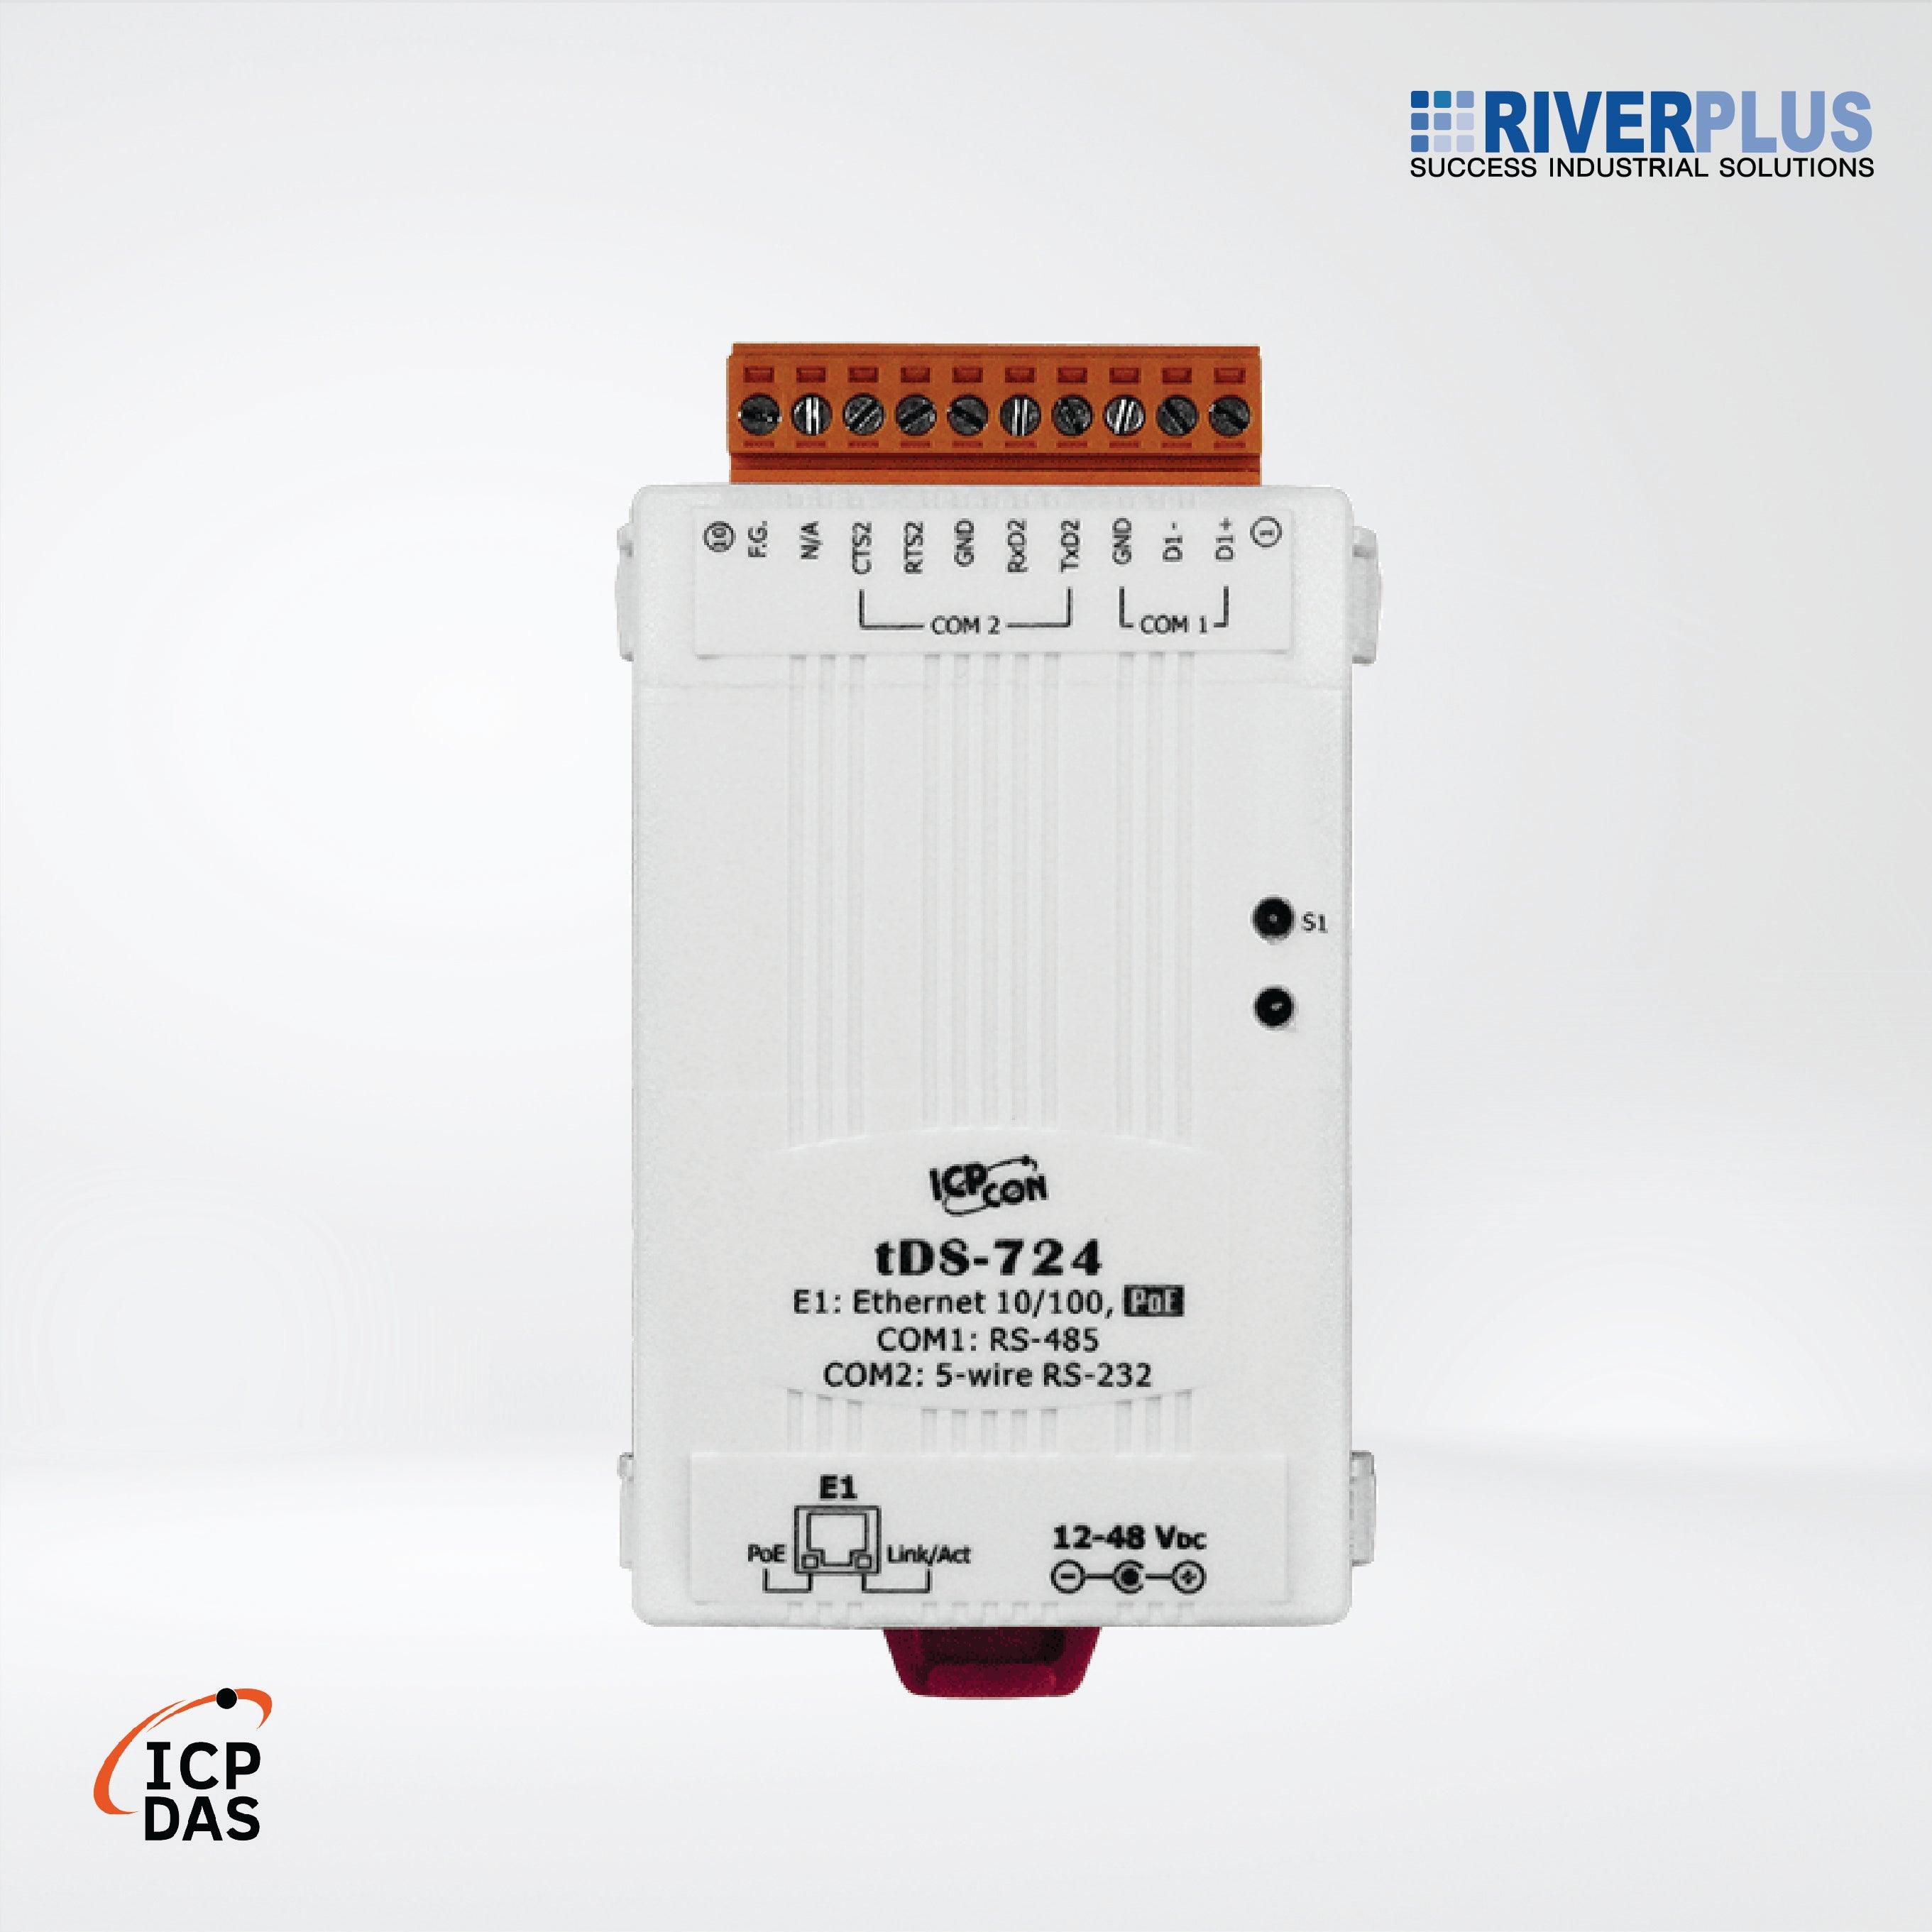 tDS-724 CR Tiny (1x RS-232 and 1x RS-485) Serial-to-Ethernet Device Server with PoE - Riverplus